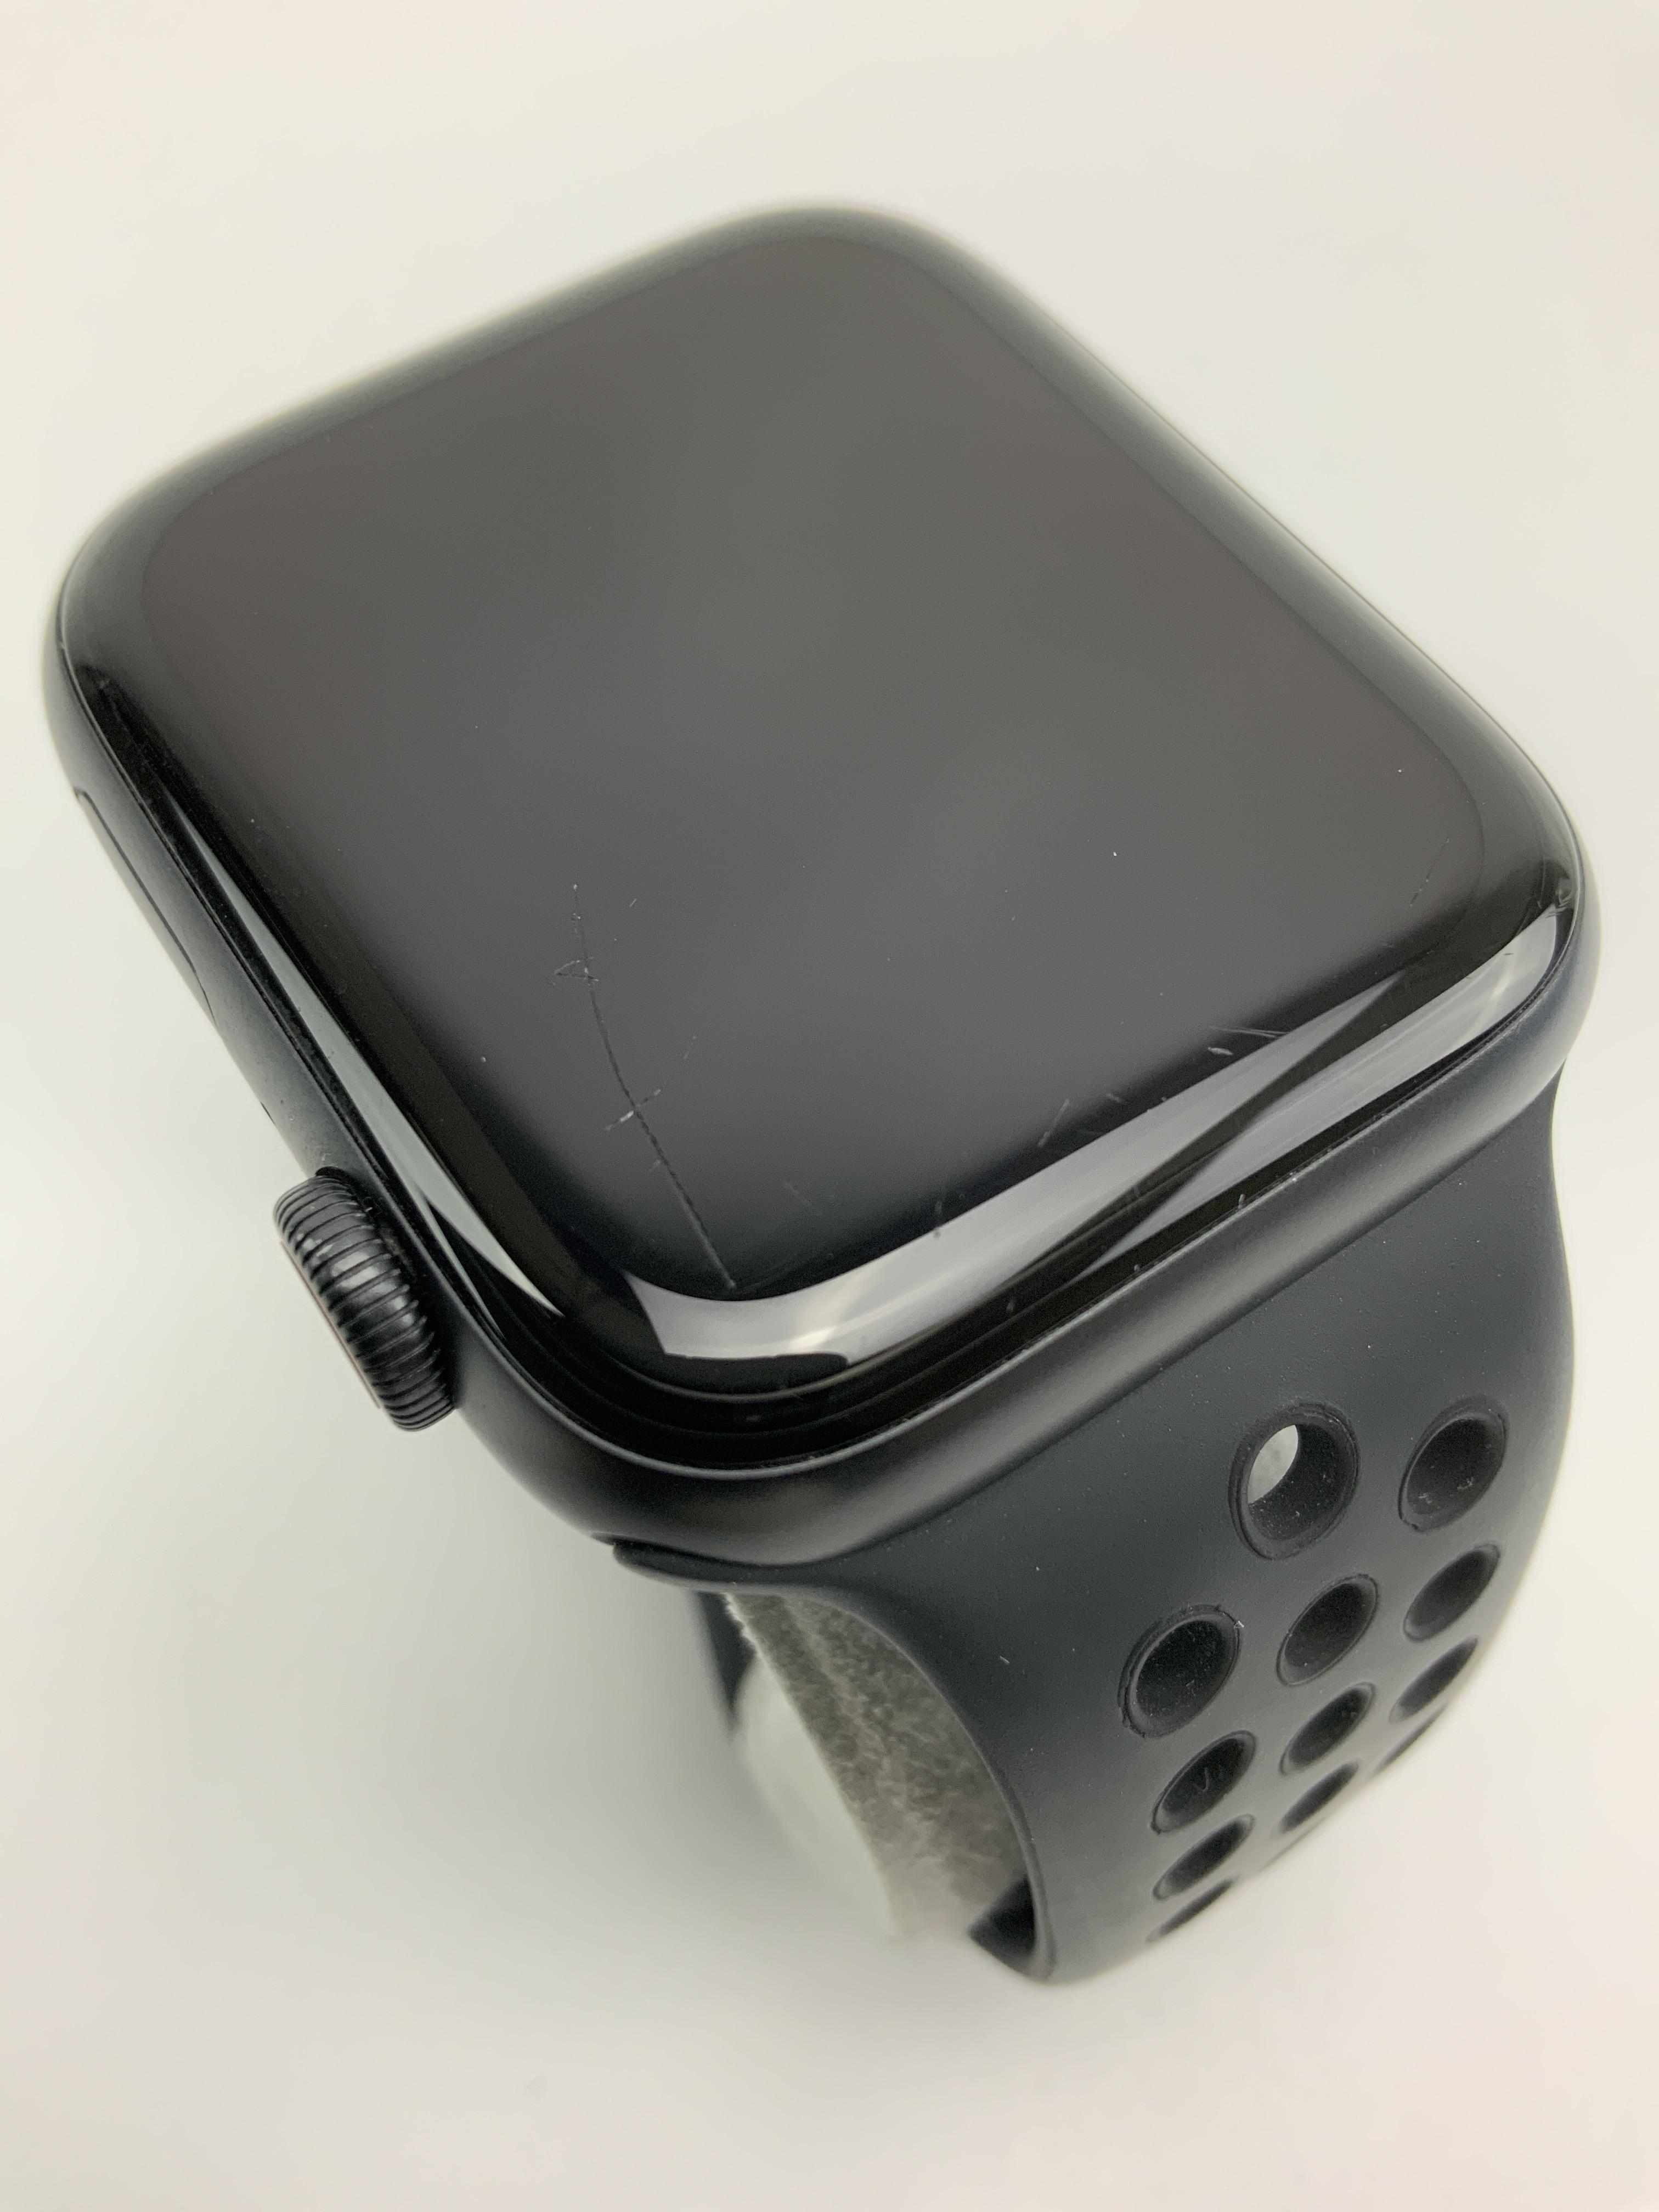 Watch Series 6 Aluminum Cellular (44mm), Space Gray, image 2